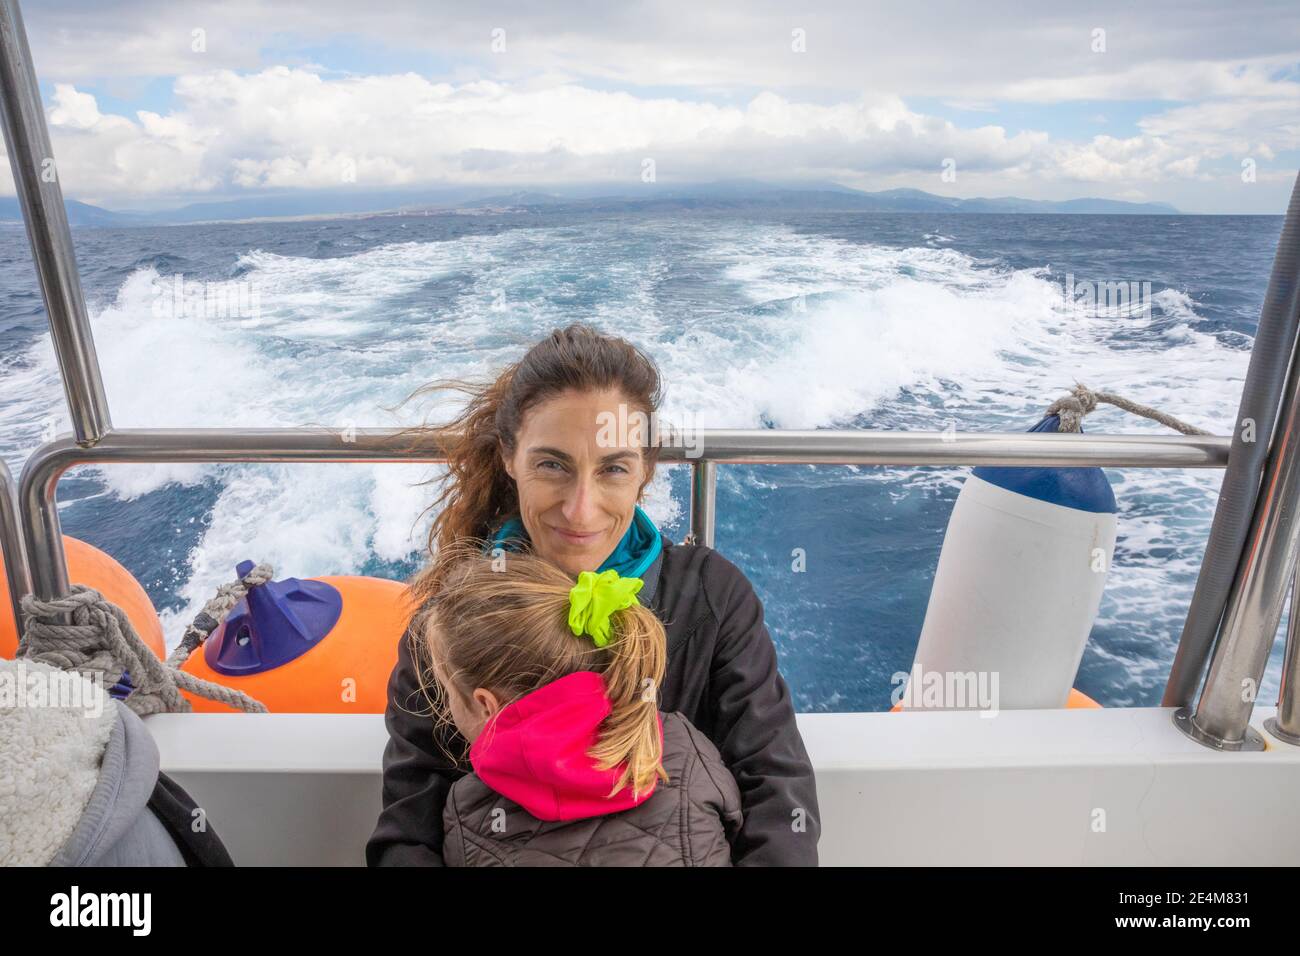 mother, smiling and looking at, embracing her daughter, four years old blonde girl with pigtail, sitting on the stern of motorboat sailing from Tarifa Stock Photo